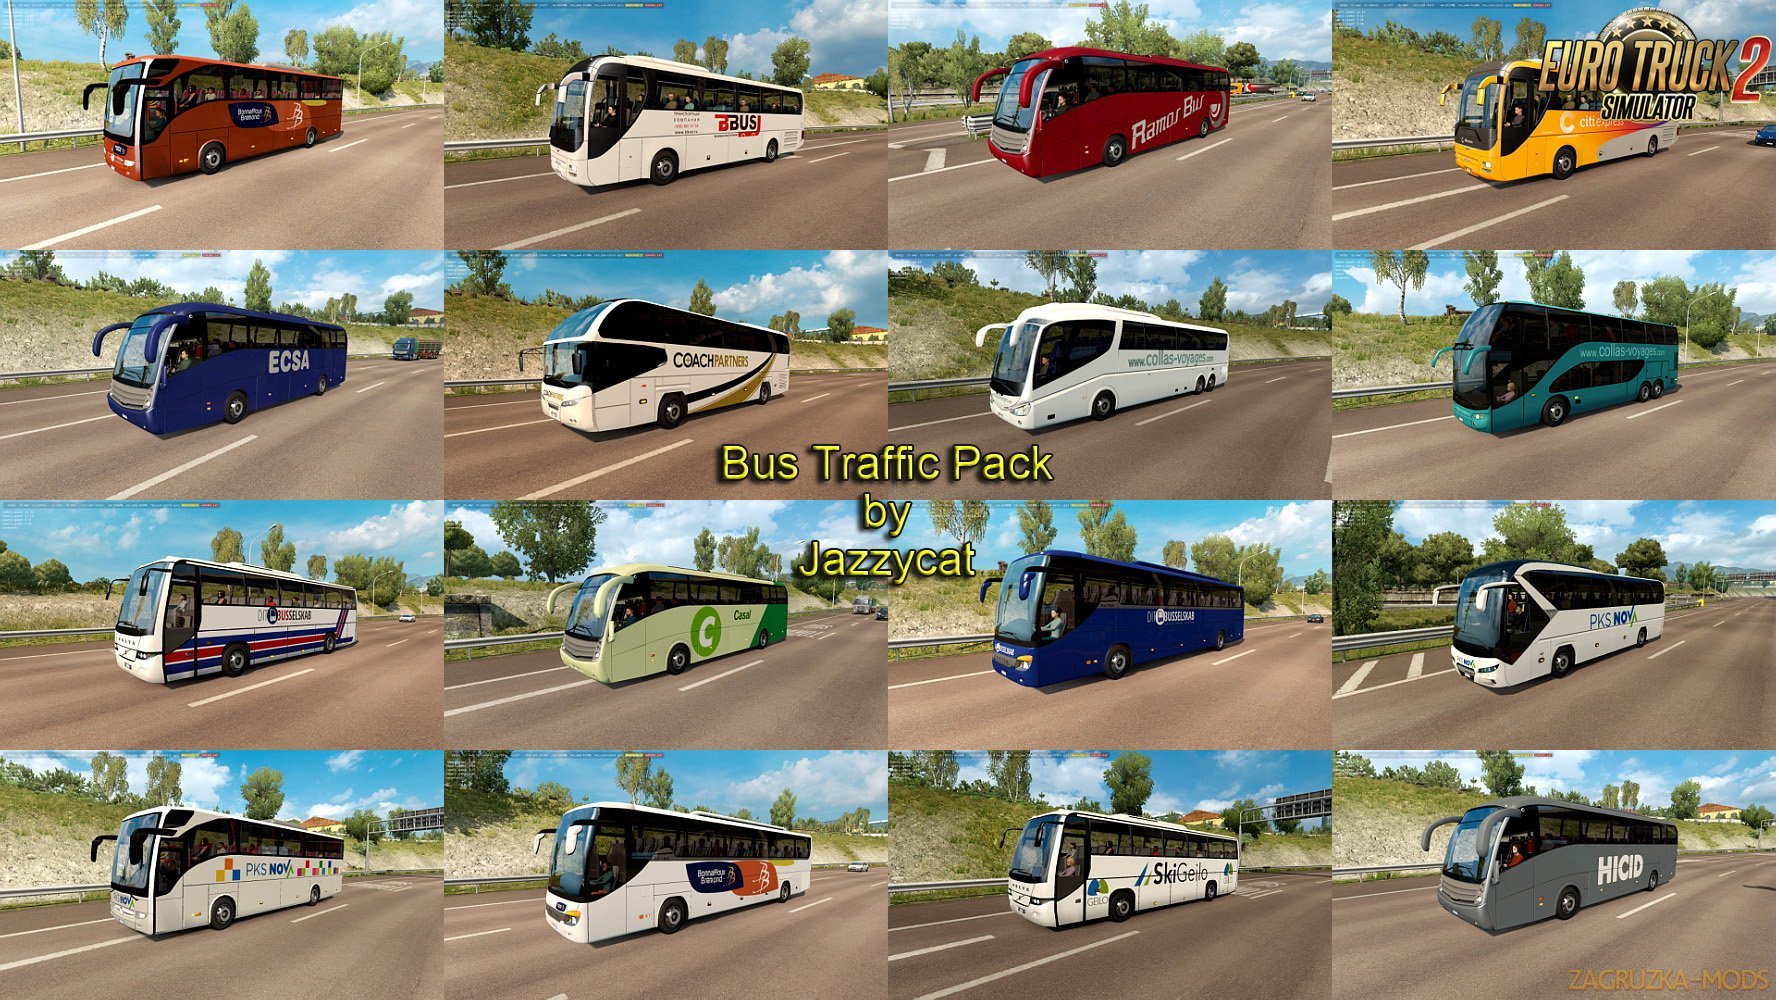 Bus Traffic Pack v4.2 by Jazzycat